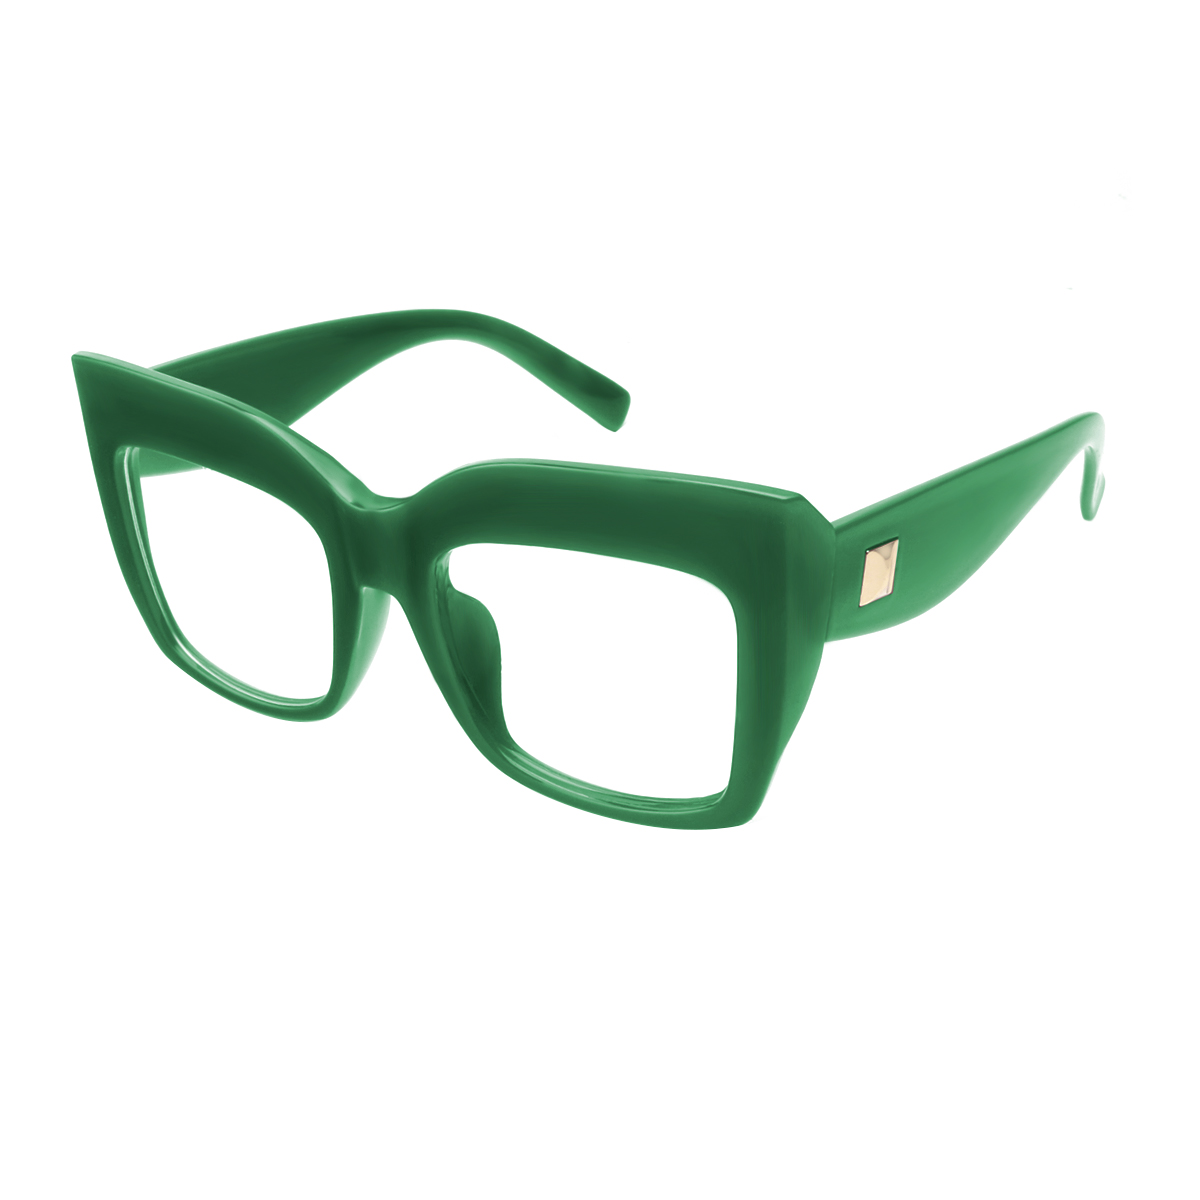 Cicely - Square Green Reading Glasses for Women